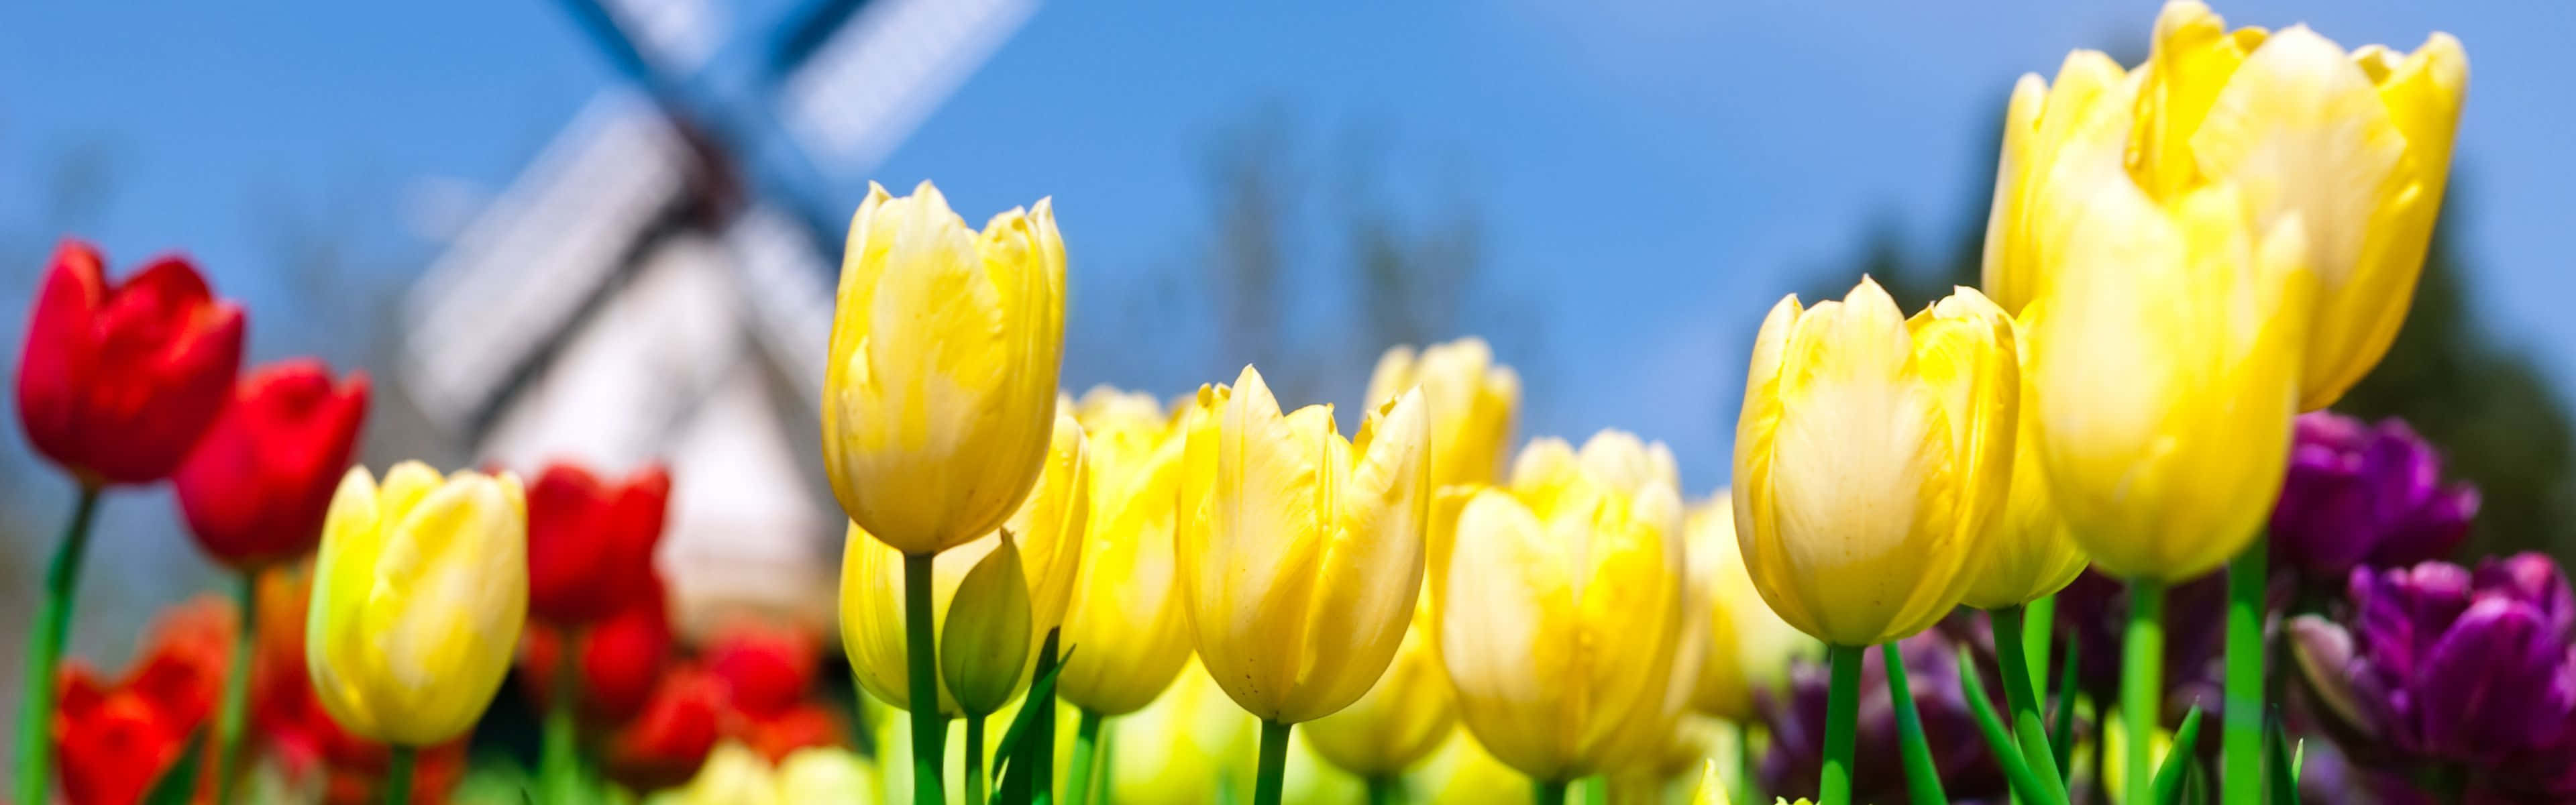 Enjoy the Colors of Springtime on Two Monitors Wallpaper